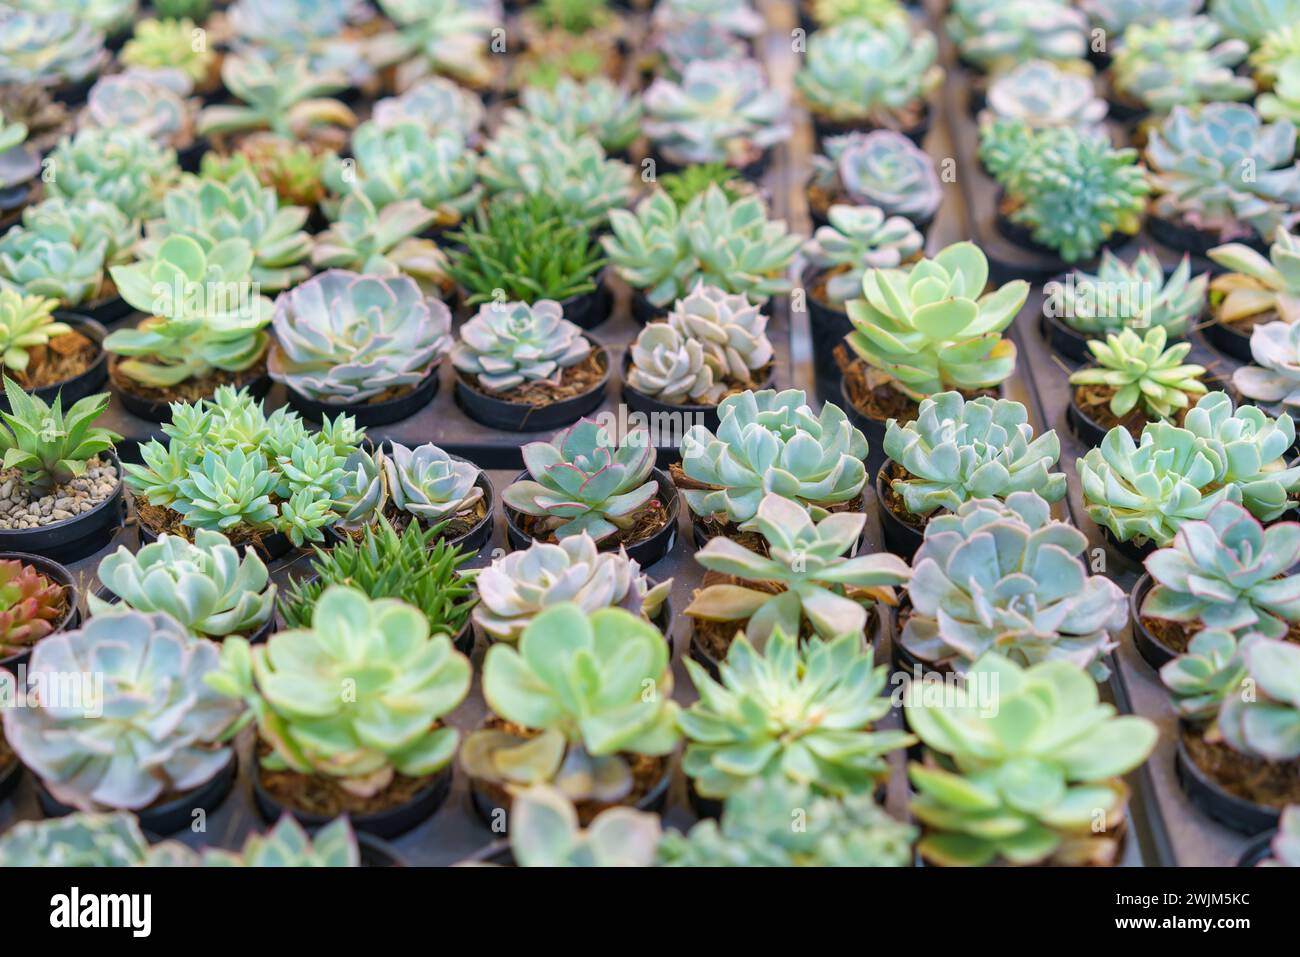 An extensive array of Echeveria succulents, showcasing their rosette forms and subtle color variations, potted and arranged at a nursery Stock Photo